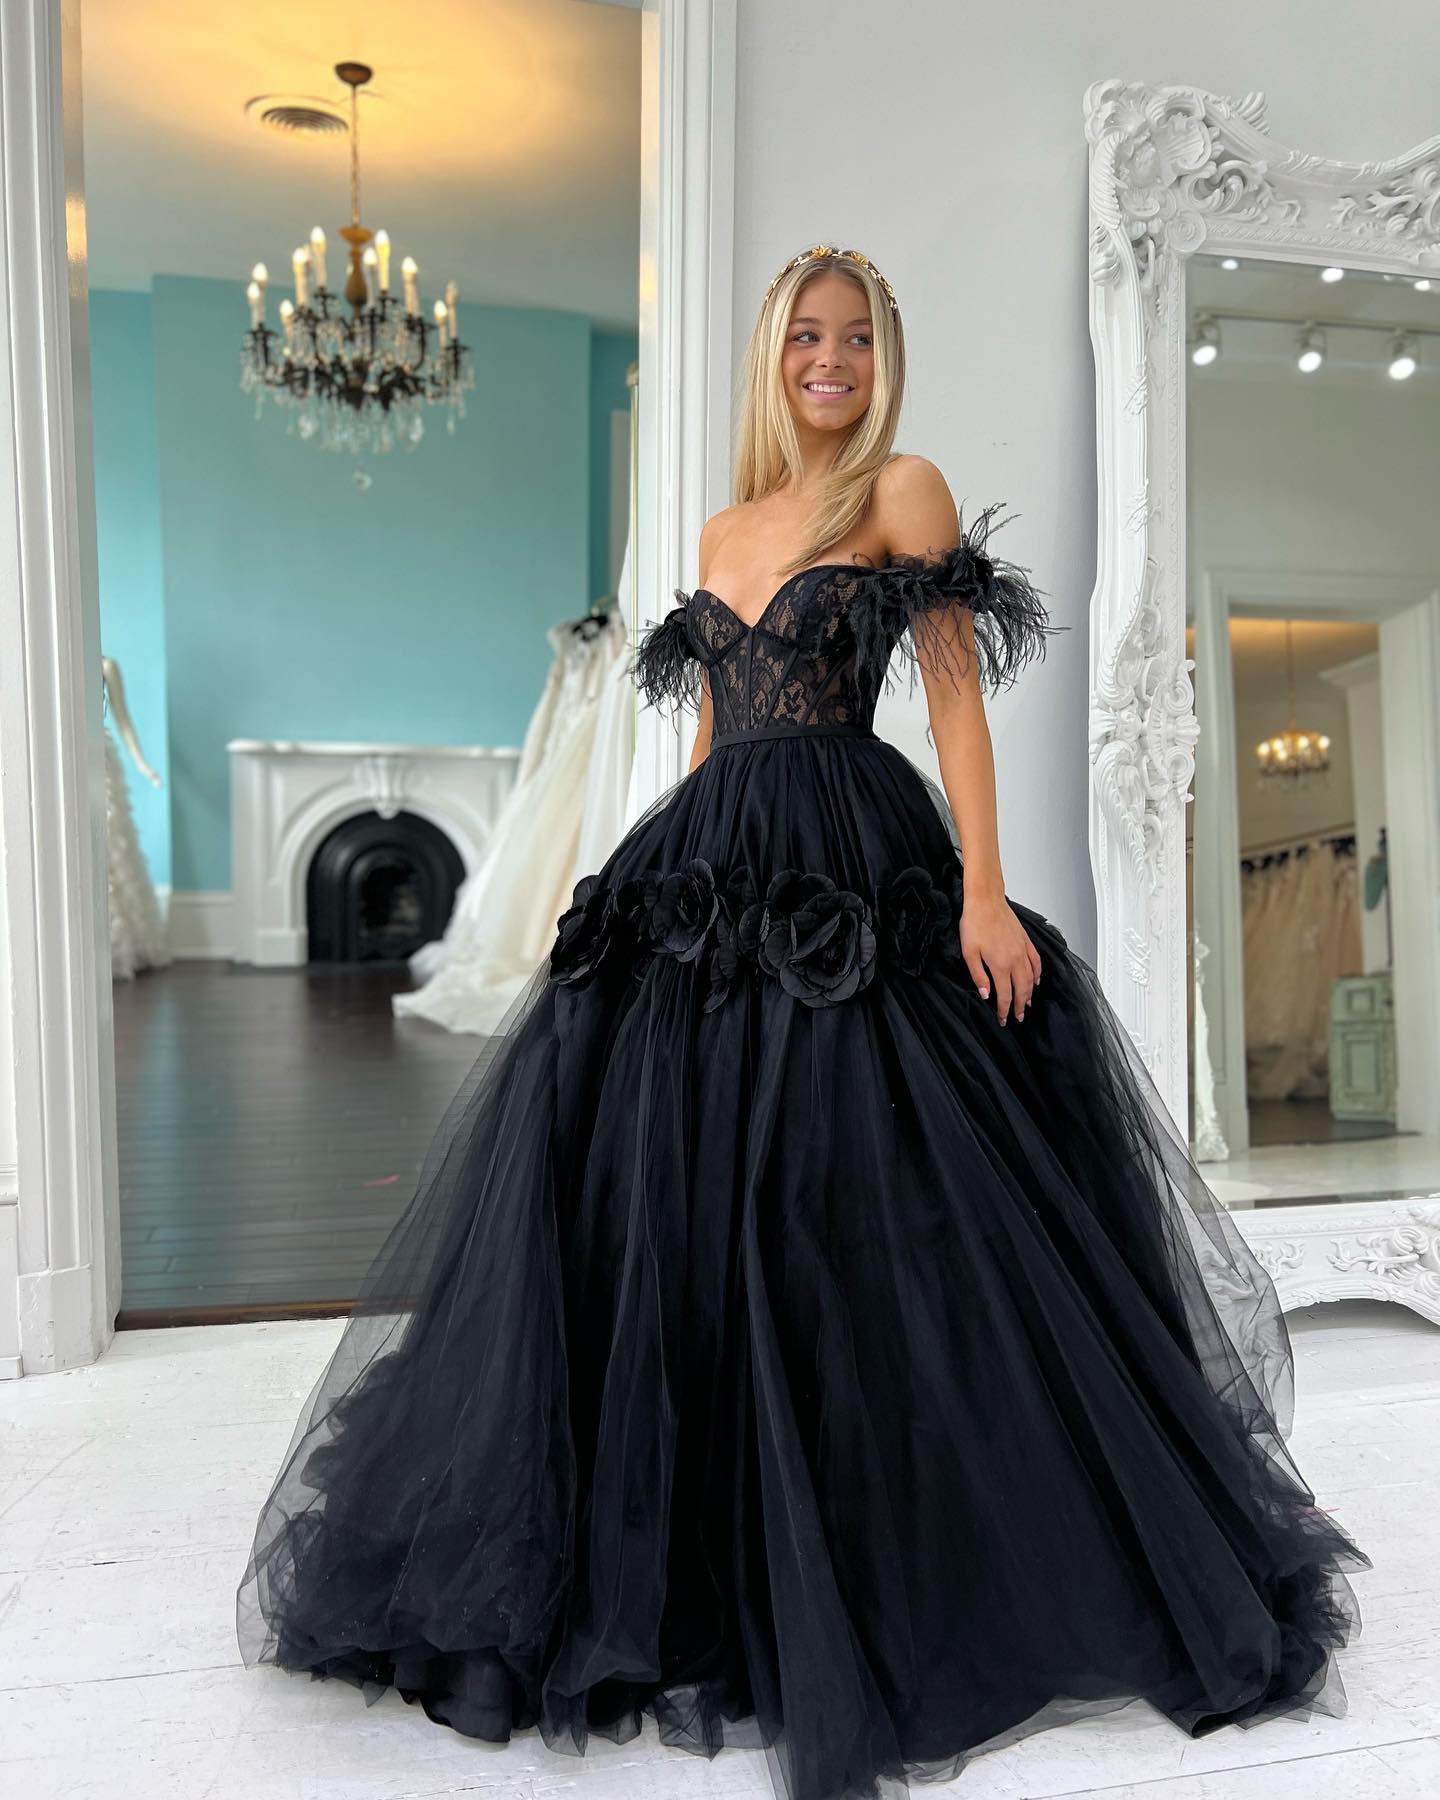 Blush prom jurk 2k23 Off-shoulder Ballgown 3d Rose Floral Lady Pageant Formal Event Party Runway Black-Tie Gala Quince Sheer Lace Bodice Featic Cap Mouwen